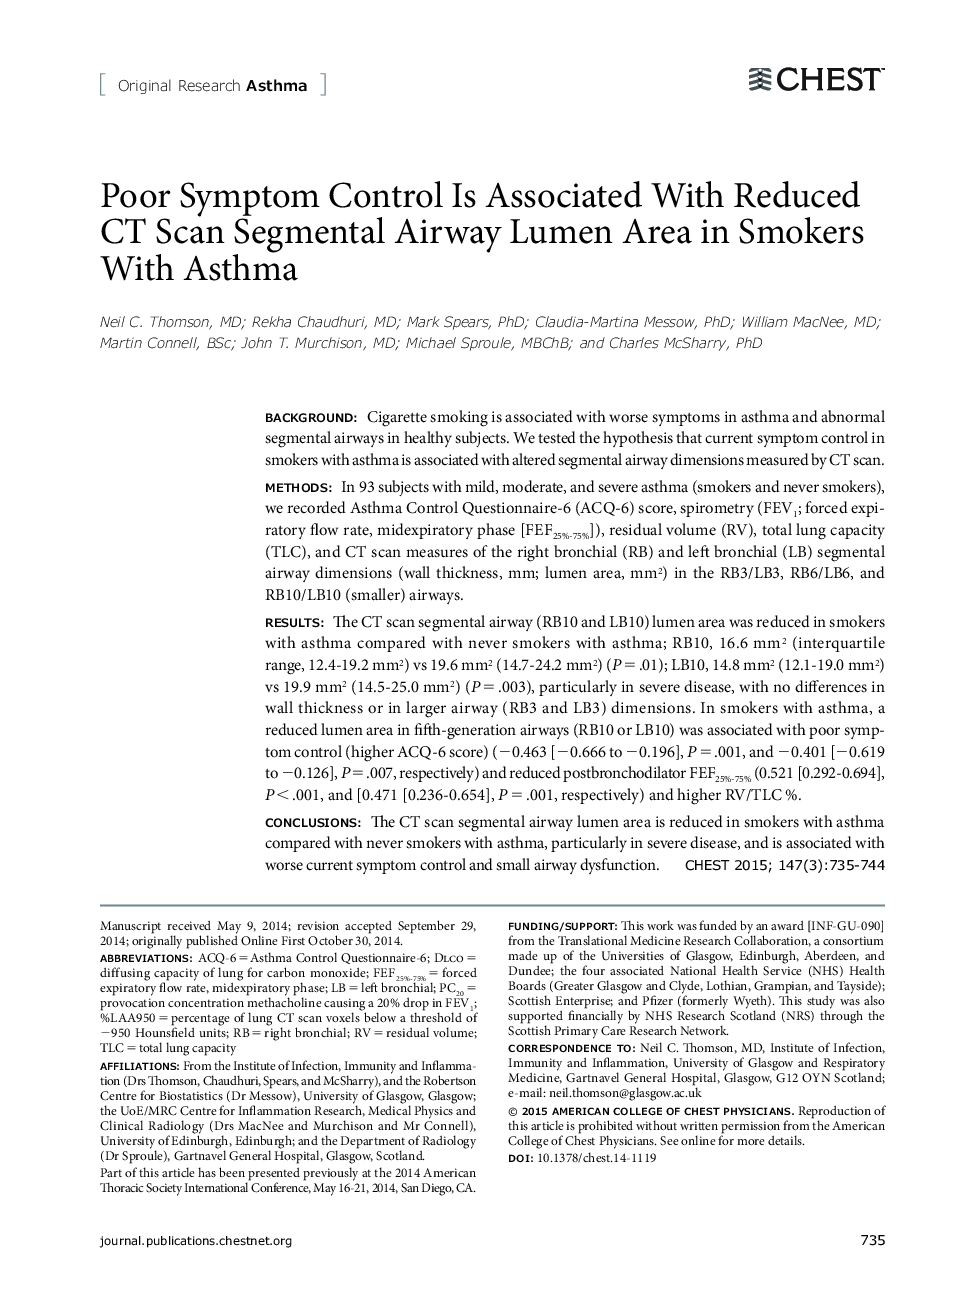 Poor Symptom Control Is Associated With Reduced CT Scan Segmental Airway Lumen Area in Smokers With Asthma 